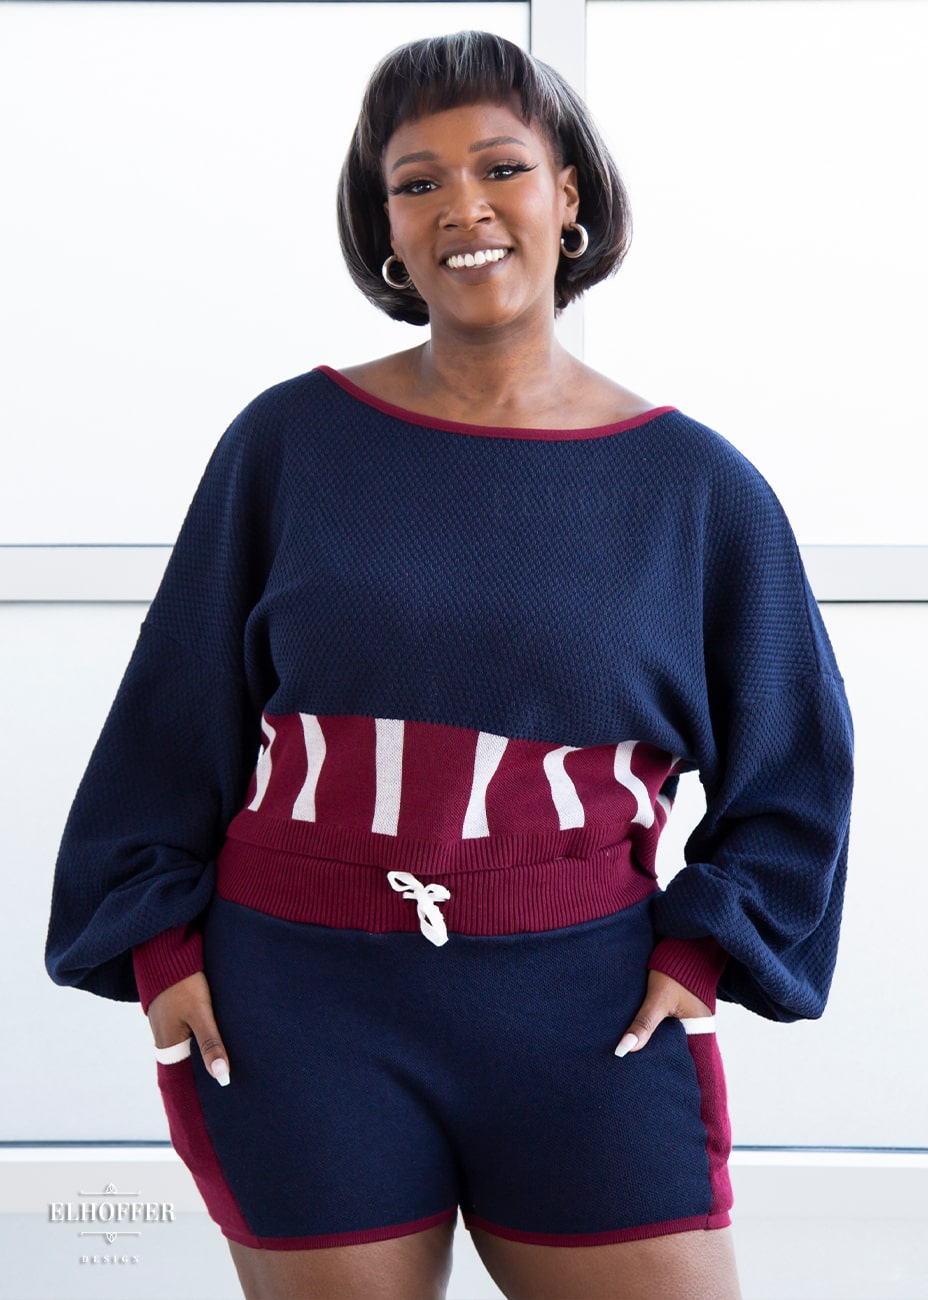 Lynsi, a medium dark skinned model with a dark brown and white bob, is wearing the red, white and blue knit oversized crop top with bishop sleeves. The sleeves and top of the crop are blue with a waffle knit, the waist is vertical red and white stripes. The cuffs are mainly red with a white detail. There is also a red detail at the neckline.